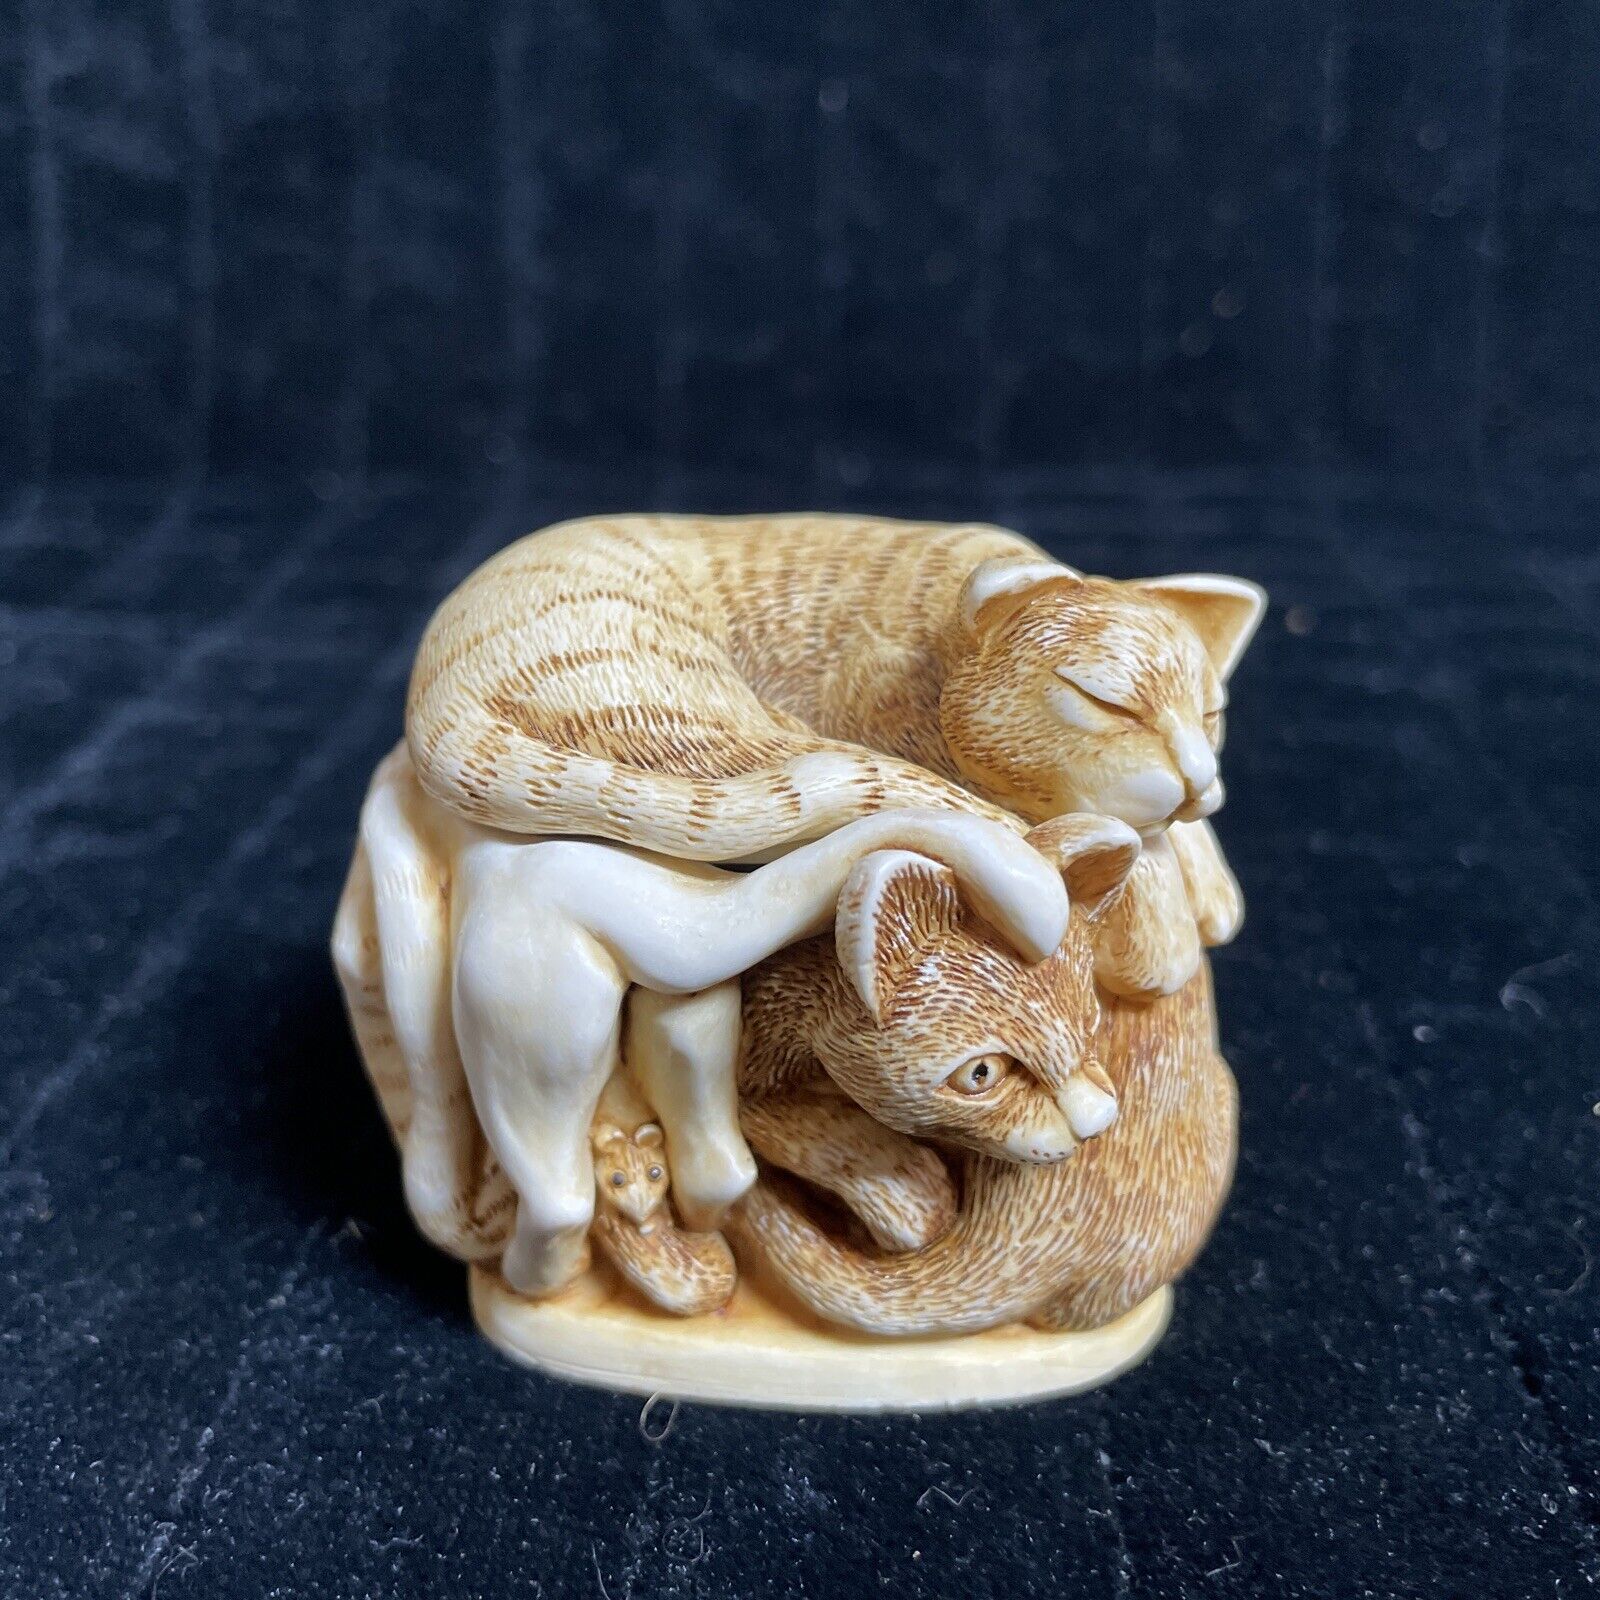 Harmony Kingdom Rather Large Friends Cats Mouse Treasure Trinket Box Collectible